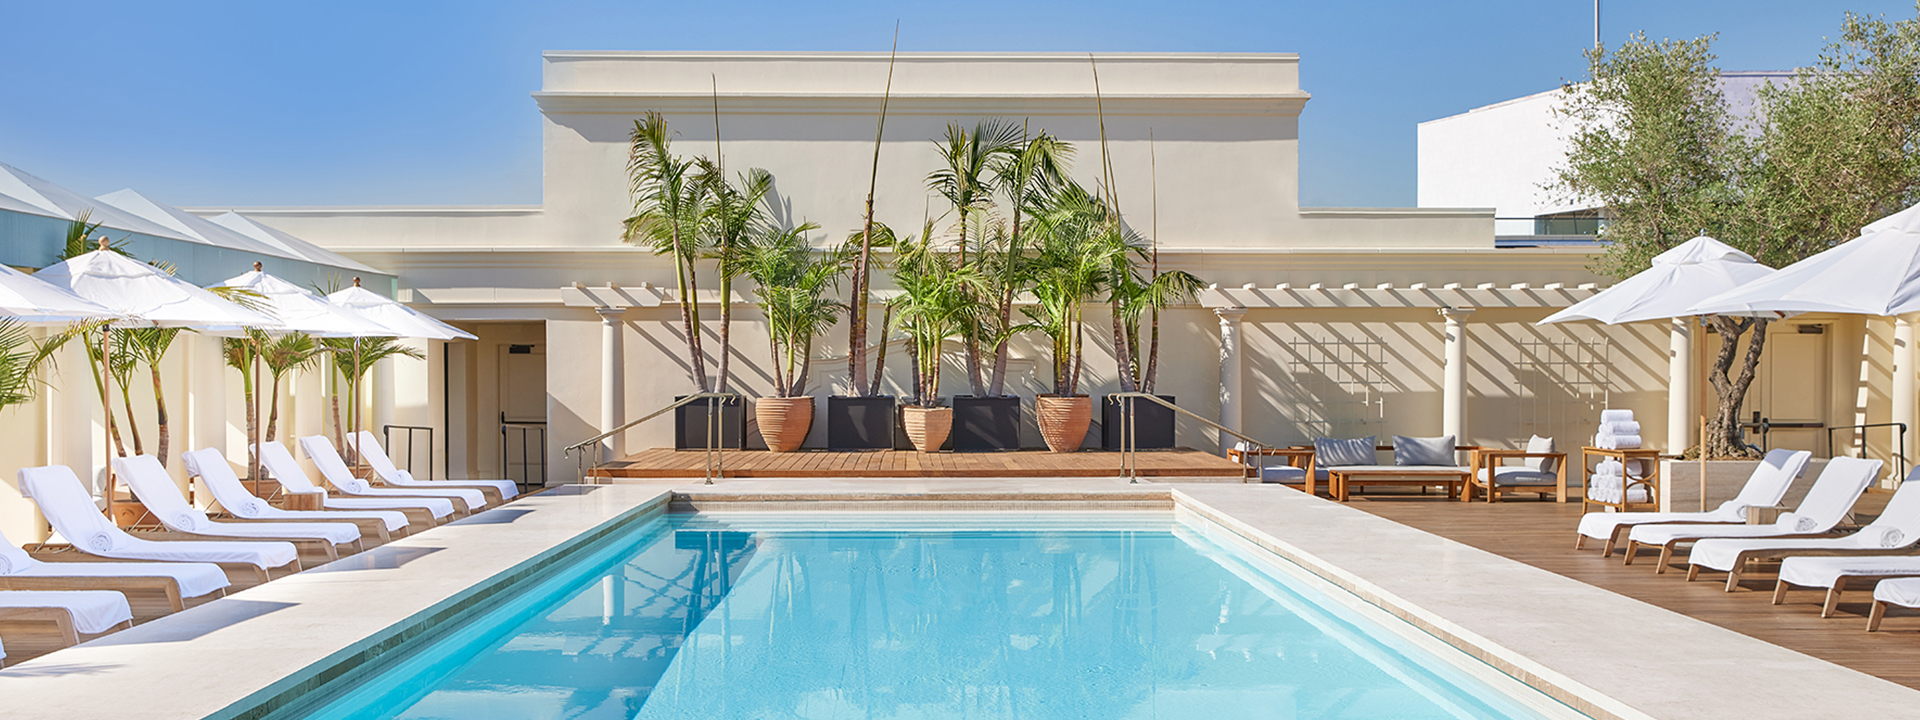 Rooftop swimming pool at The Maybourne Beverly Hills with loungers on the side and trees in the back.